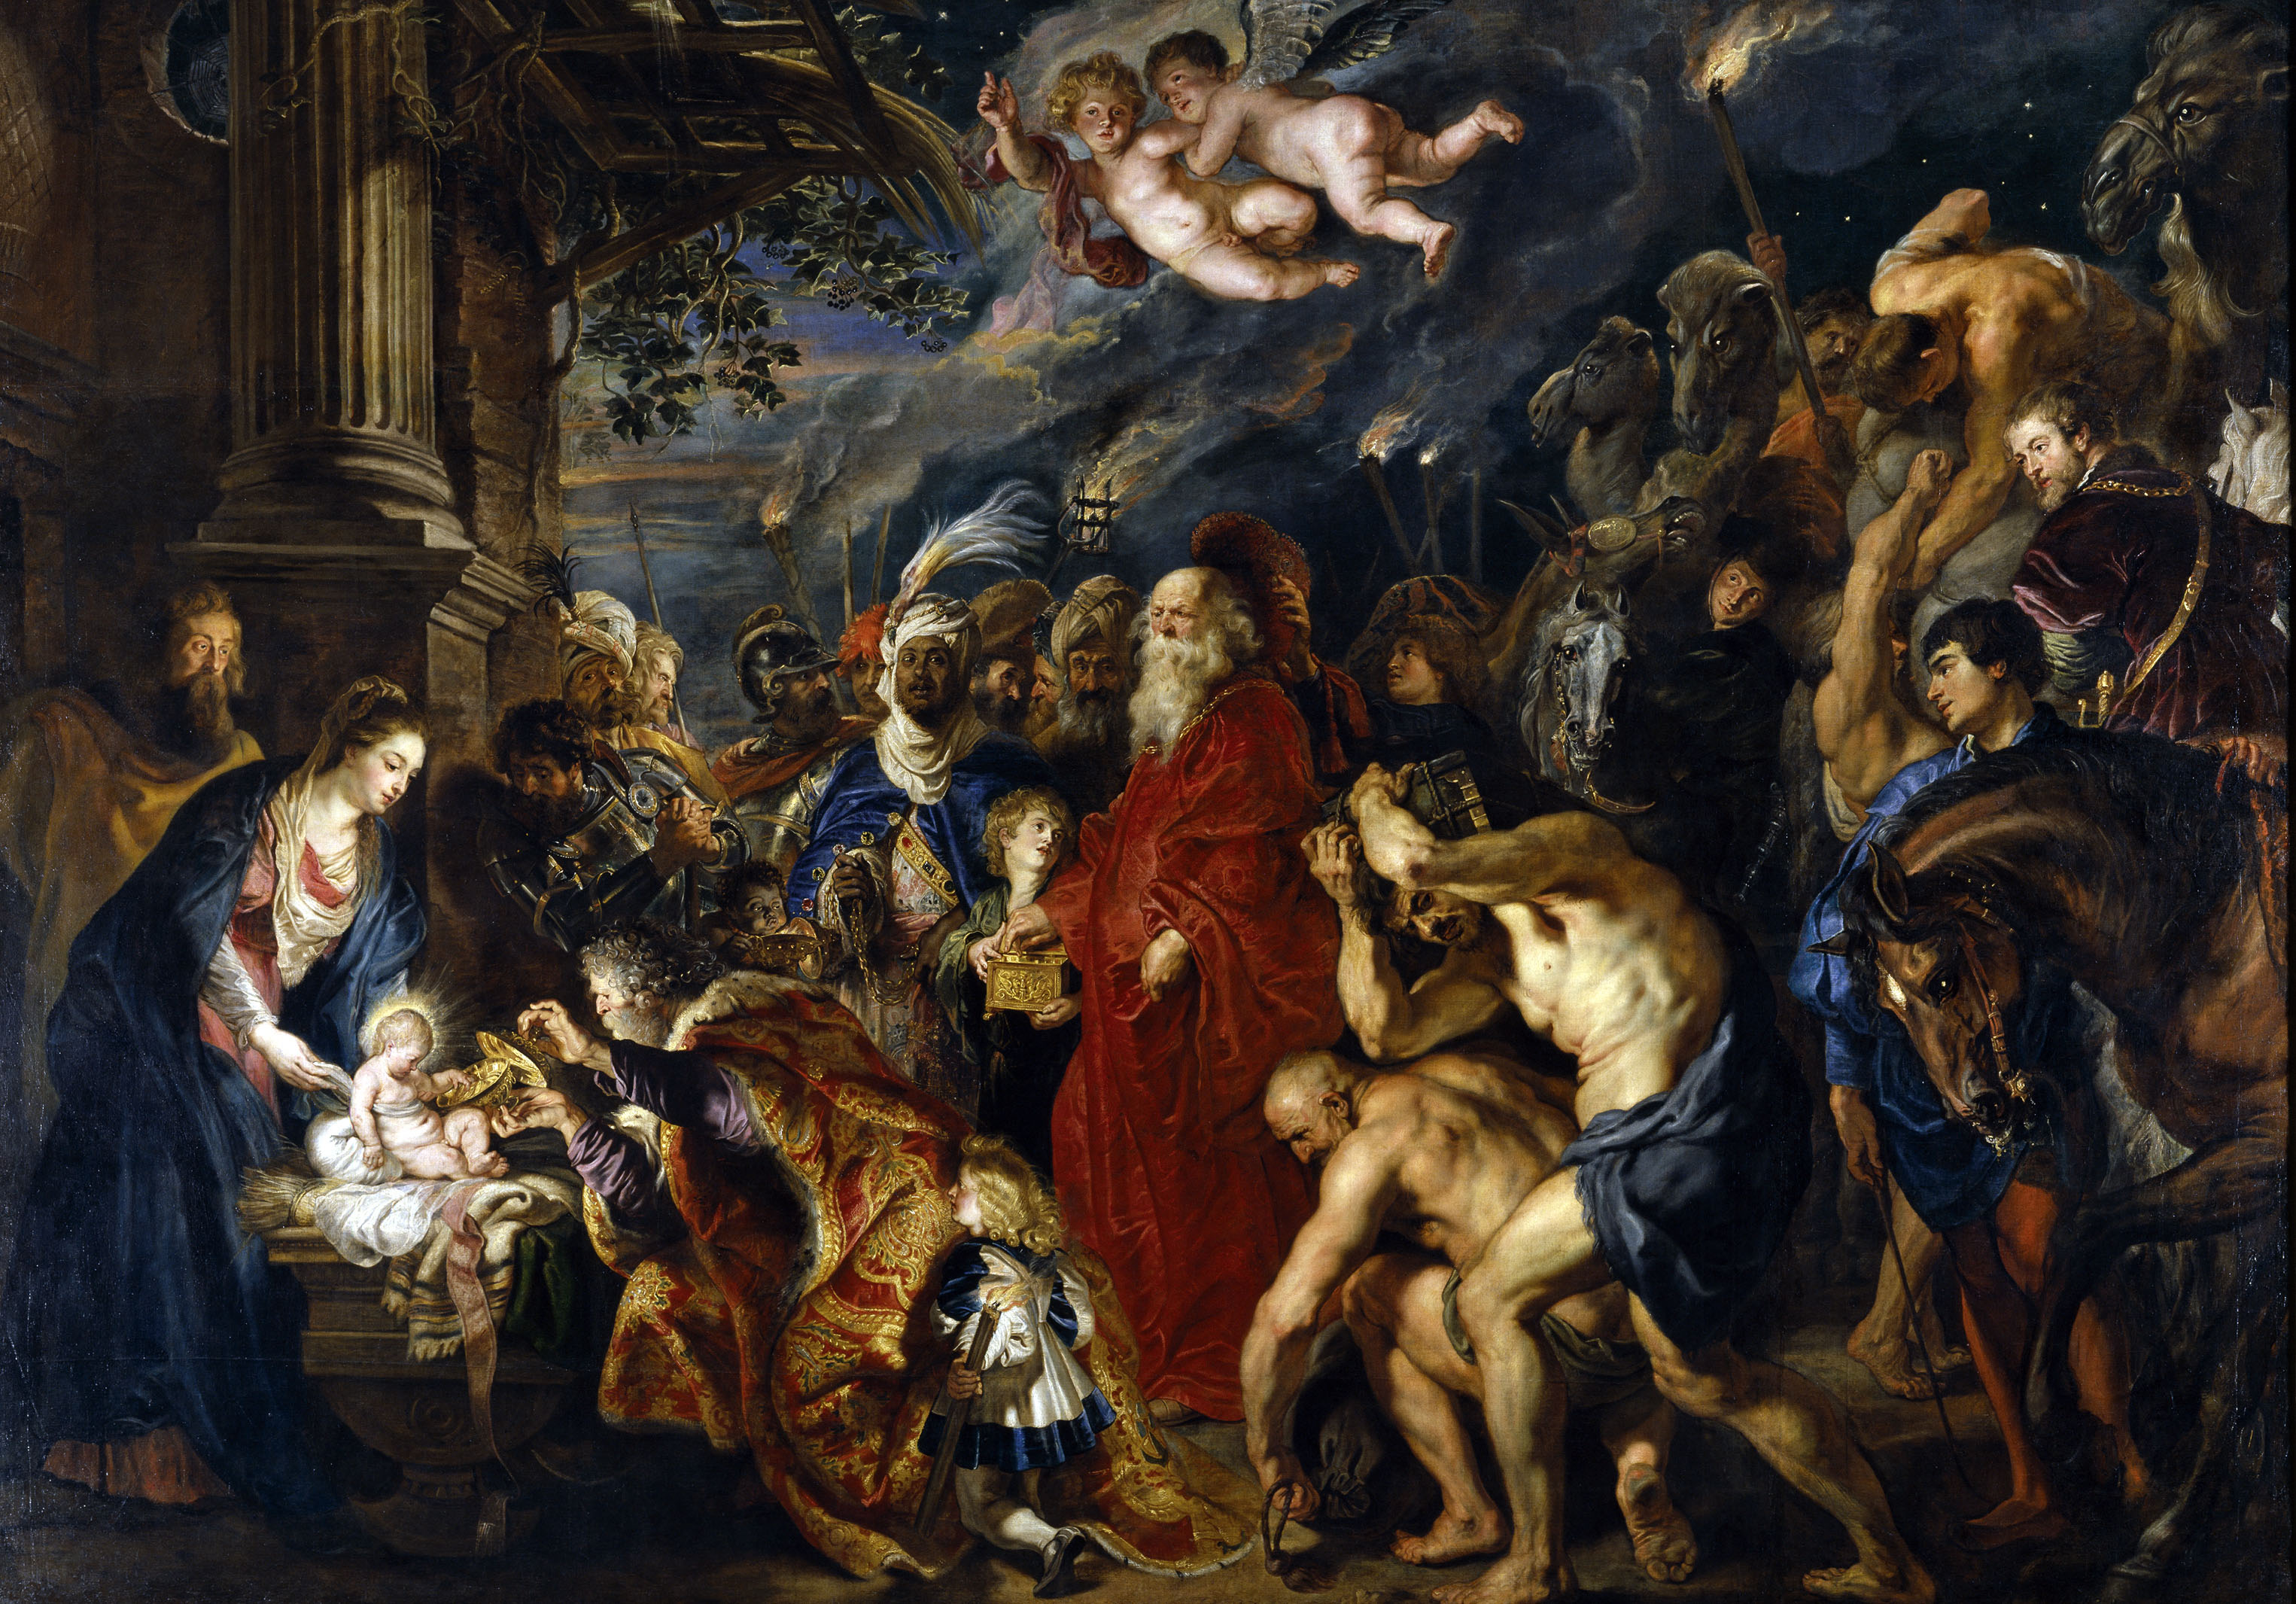 The adoration of the Magi by Peter Paul Rubens, the most famous painter from my hometown Antwerp. Painted in 1609 to decorate the negotiations hall for the Twelve Year's truce. Given to the Spanish ambassador in 1612, it came into possession of the Spanish king Philips IV. Rubens himself reworked it slightly in Spain in 1628-1629. It survived a fire in 1734 by being cut from its frame and thrown out the window, and now resides in the Prado in Madrid.